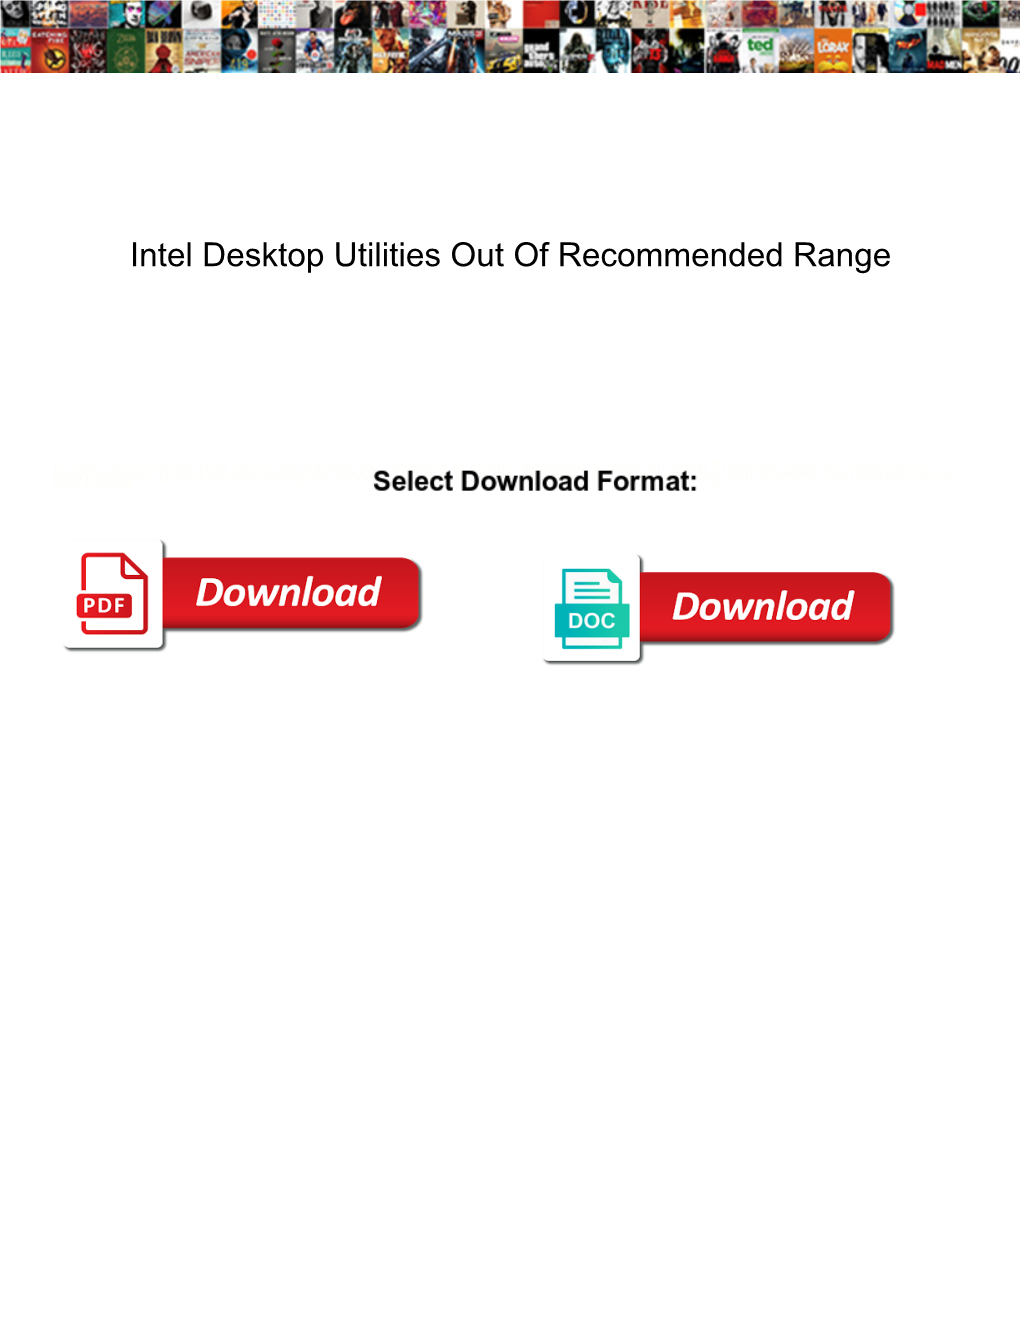 Intel Desktop Utilities out of Recommended Range